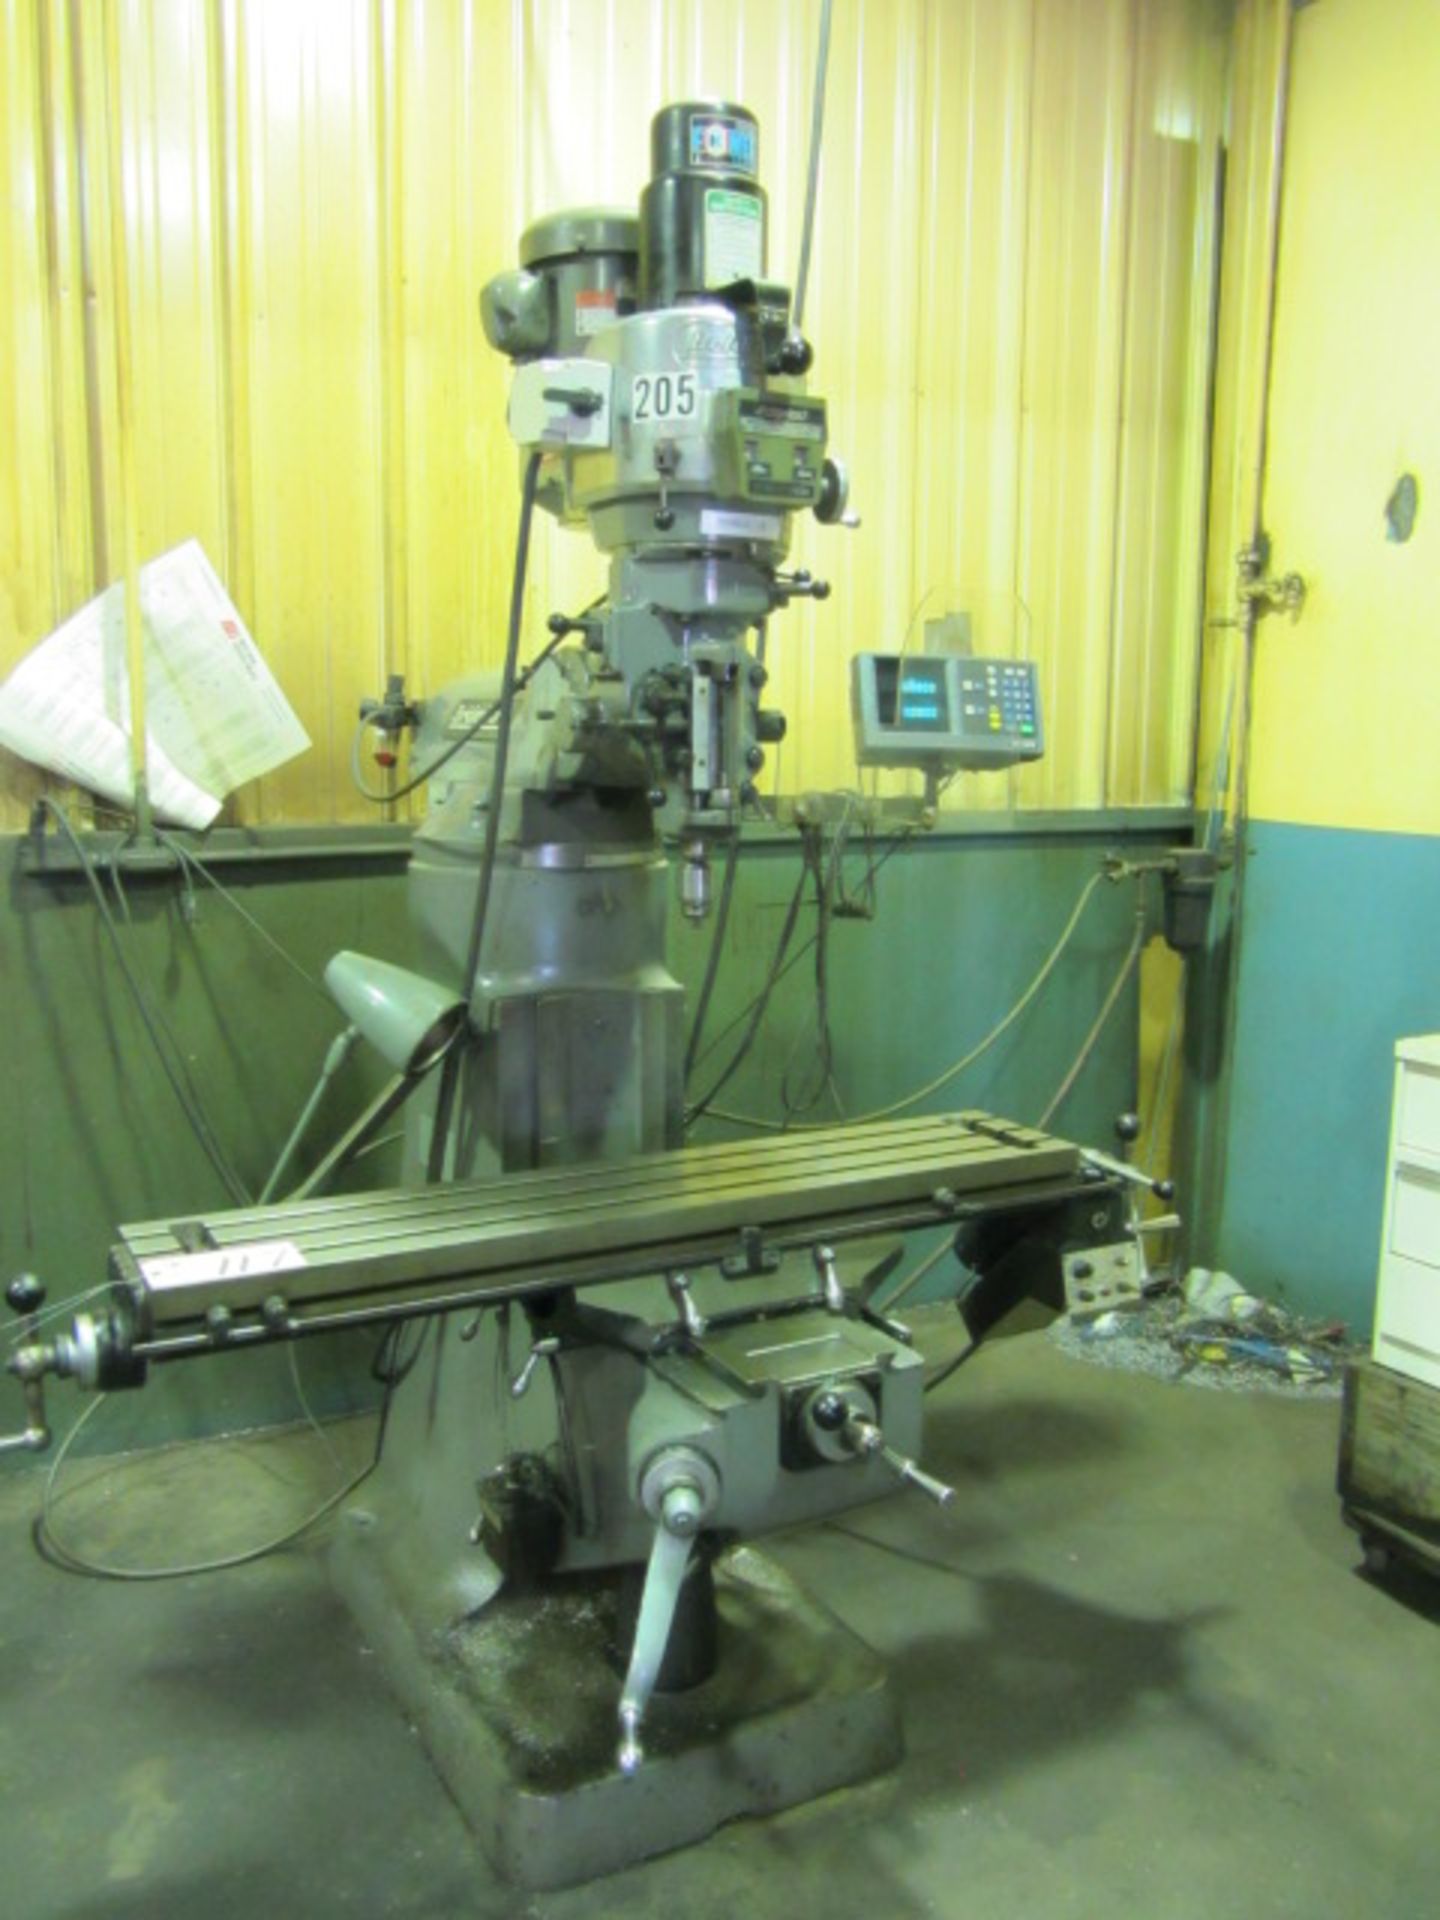 Bridgeport Variable Speed Vertical Milling Machine with 9'' x 48'' Power Feed Table, R-8 Spindle